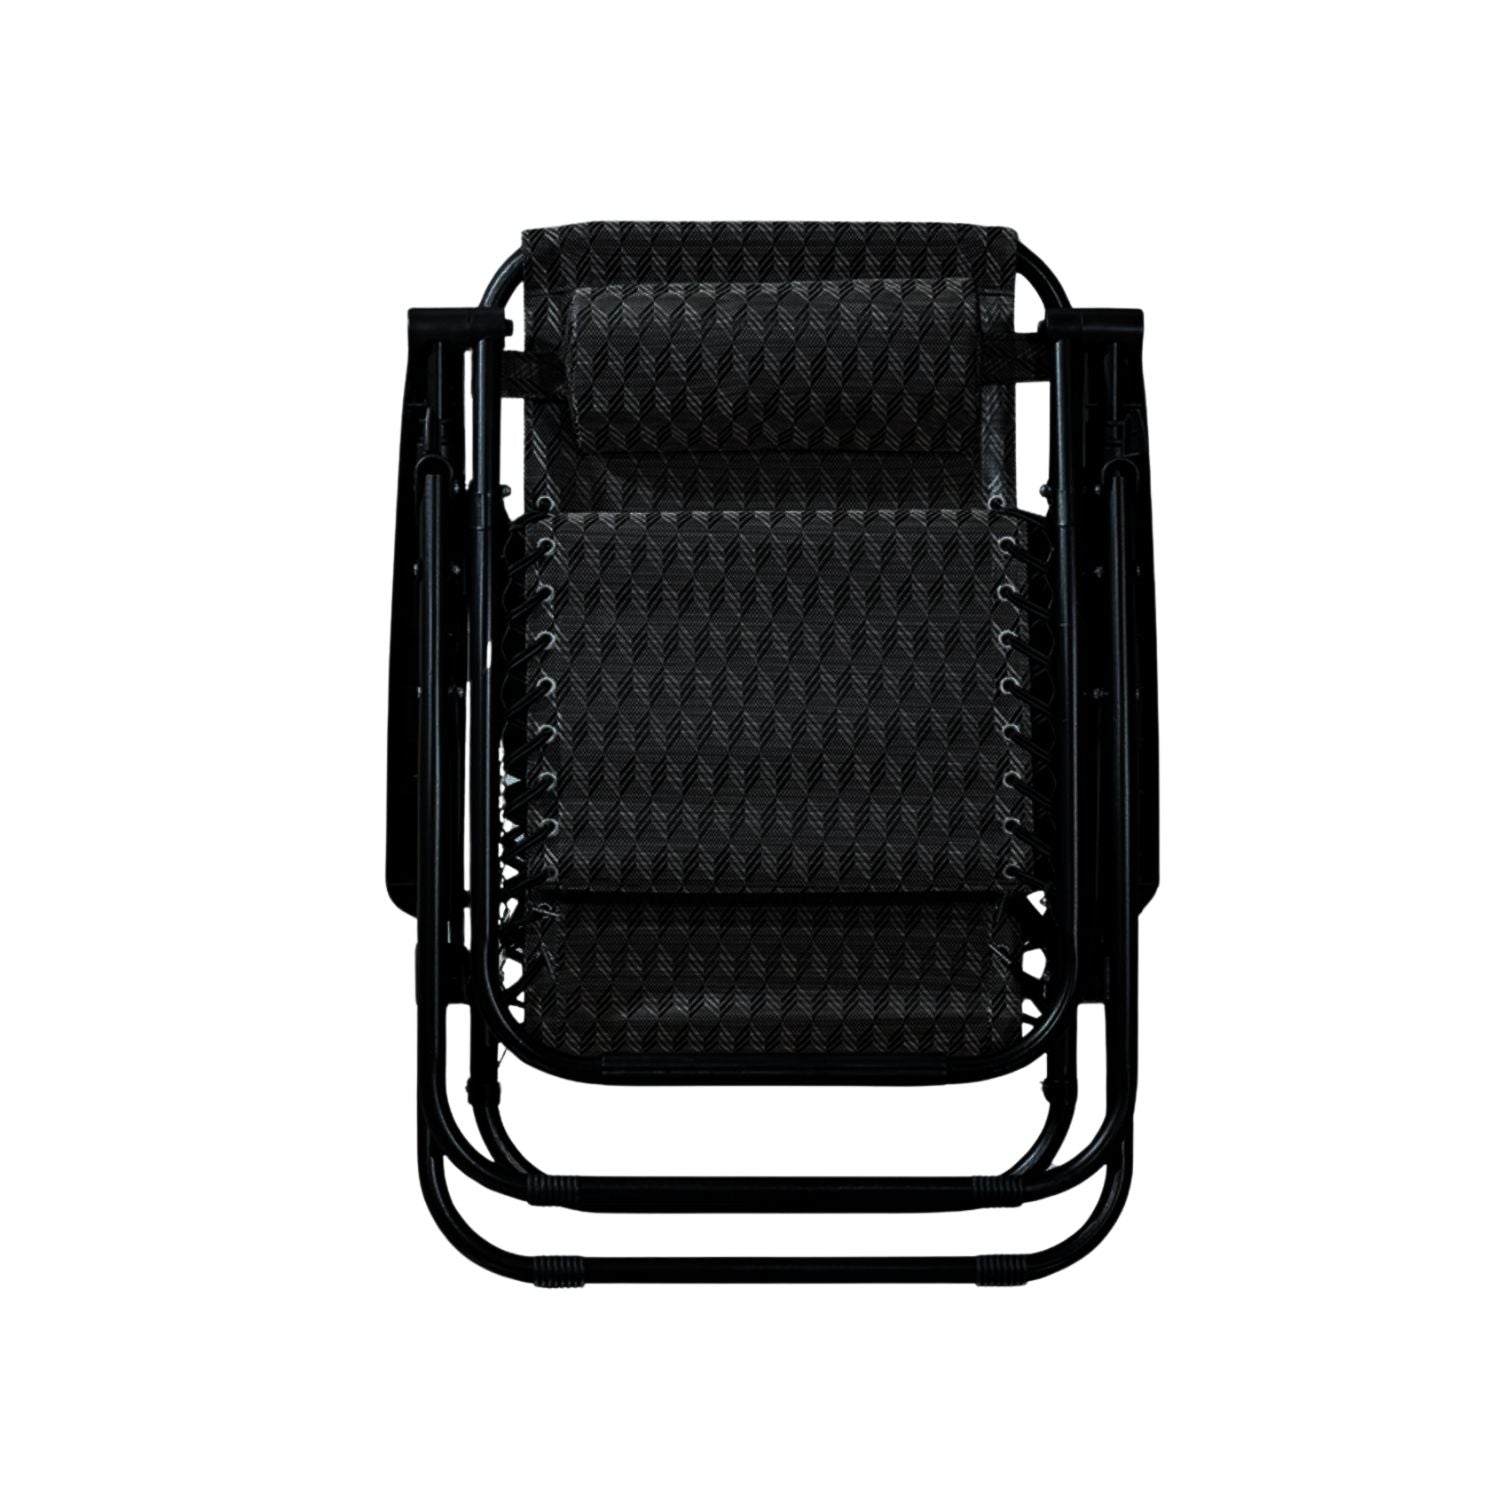 KILIROO Folding Reclining Camping Chair With Breathable Mesh (Black)